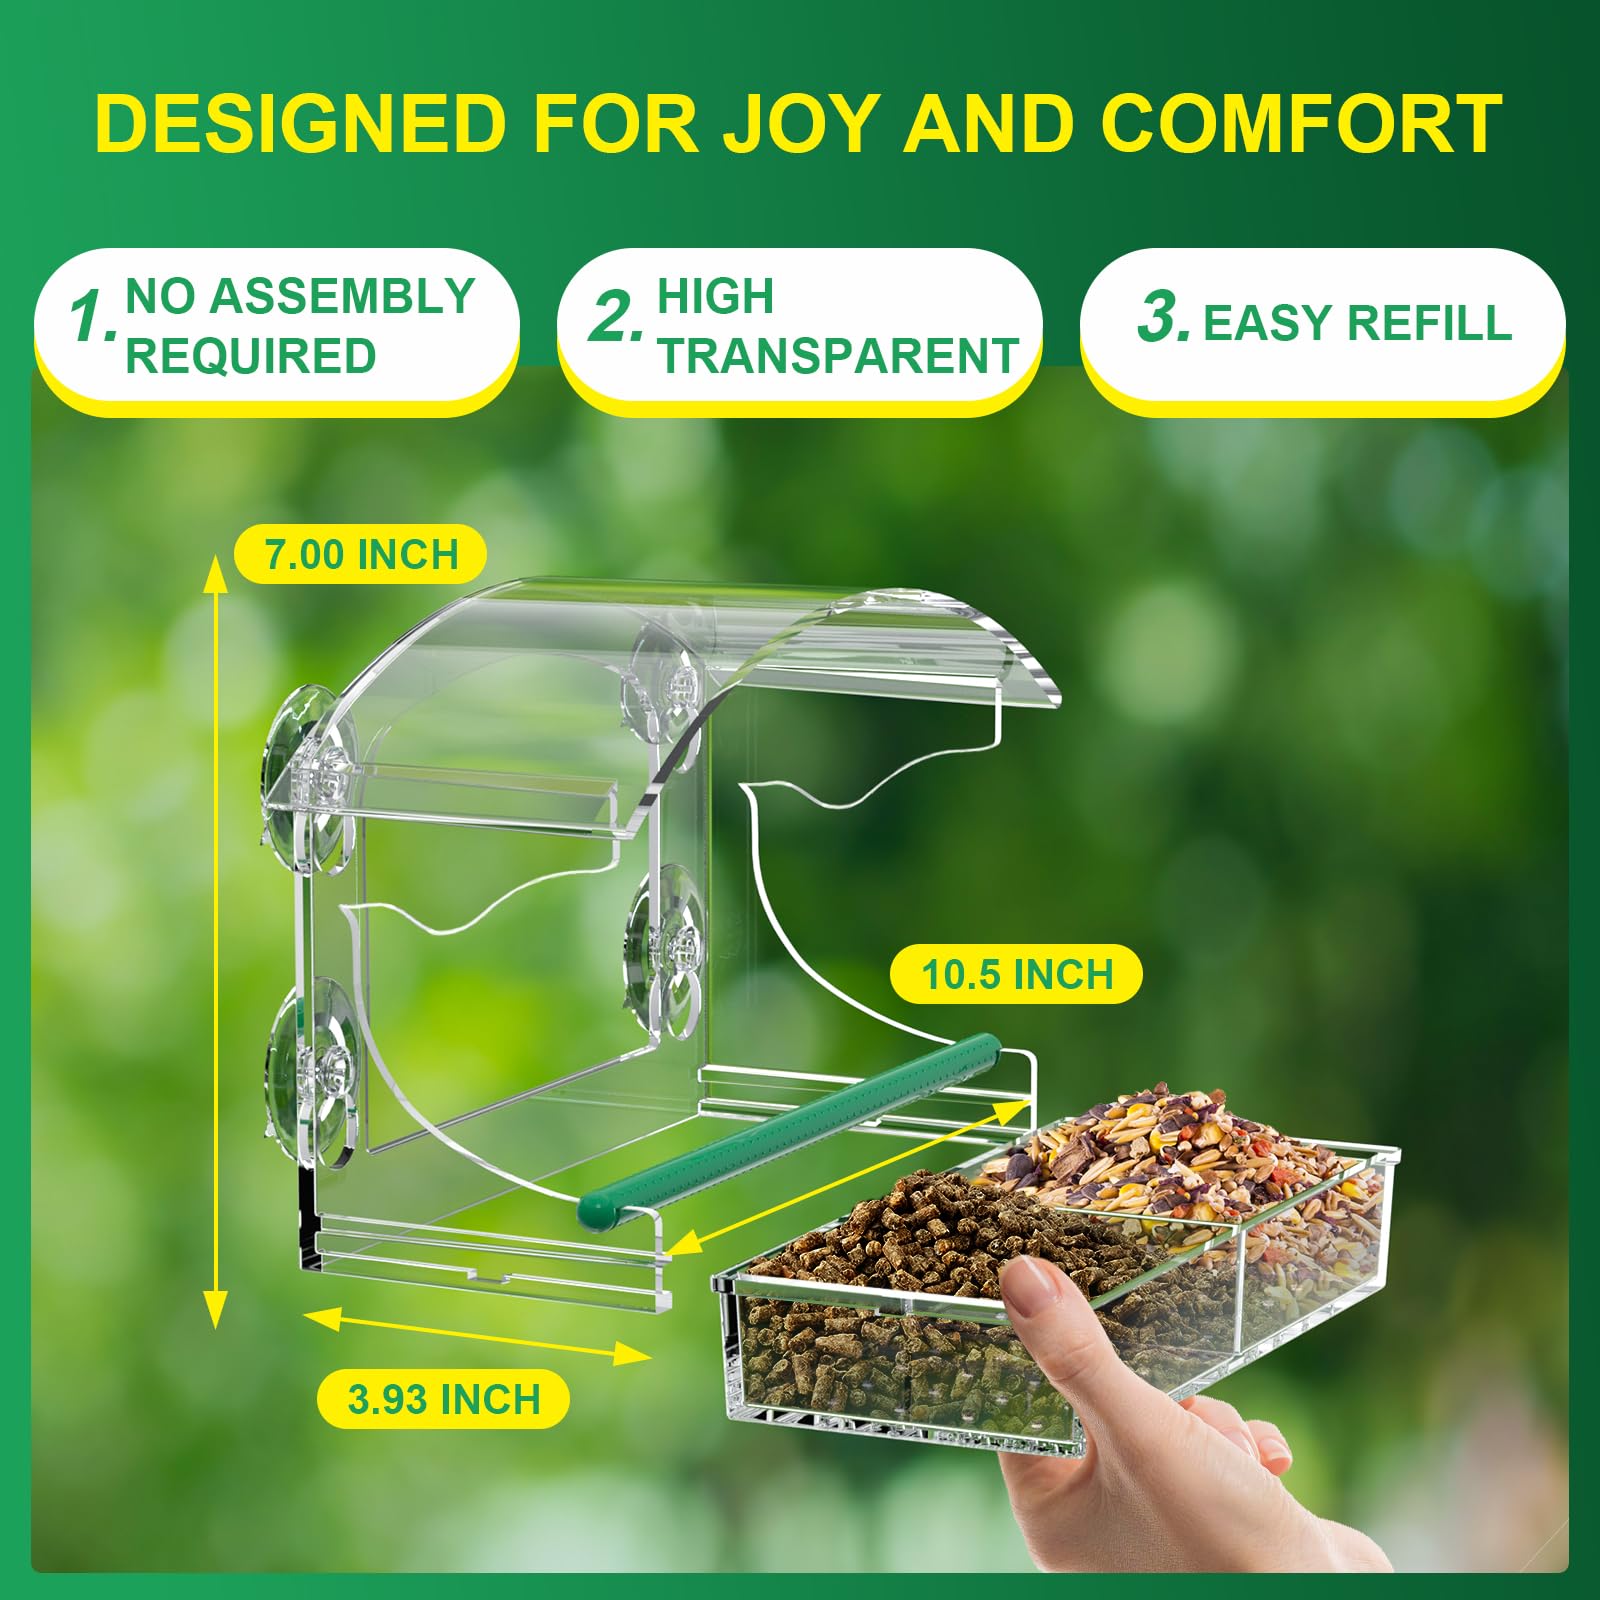 Window Bird Feeders with 4 Strong Suction Cups and Detachable Seed Tray for Small Birds only, BPYOT Acrylic Clear Bird Feeders are Unique Gardening Gifts for Elderly Grandpa/Grandma/Grandparents